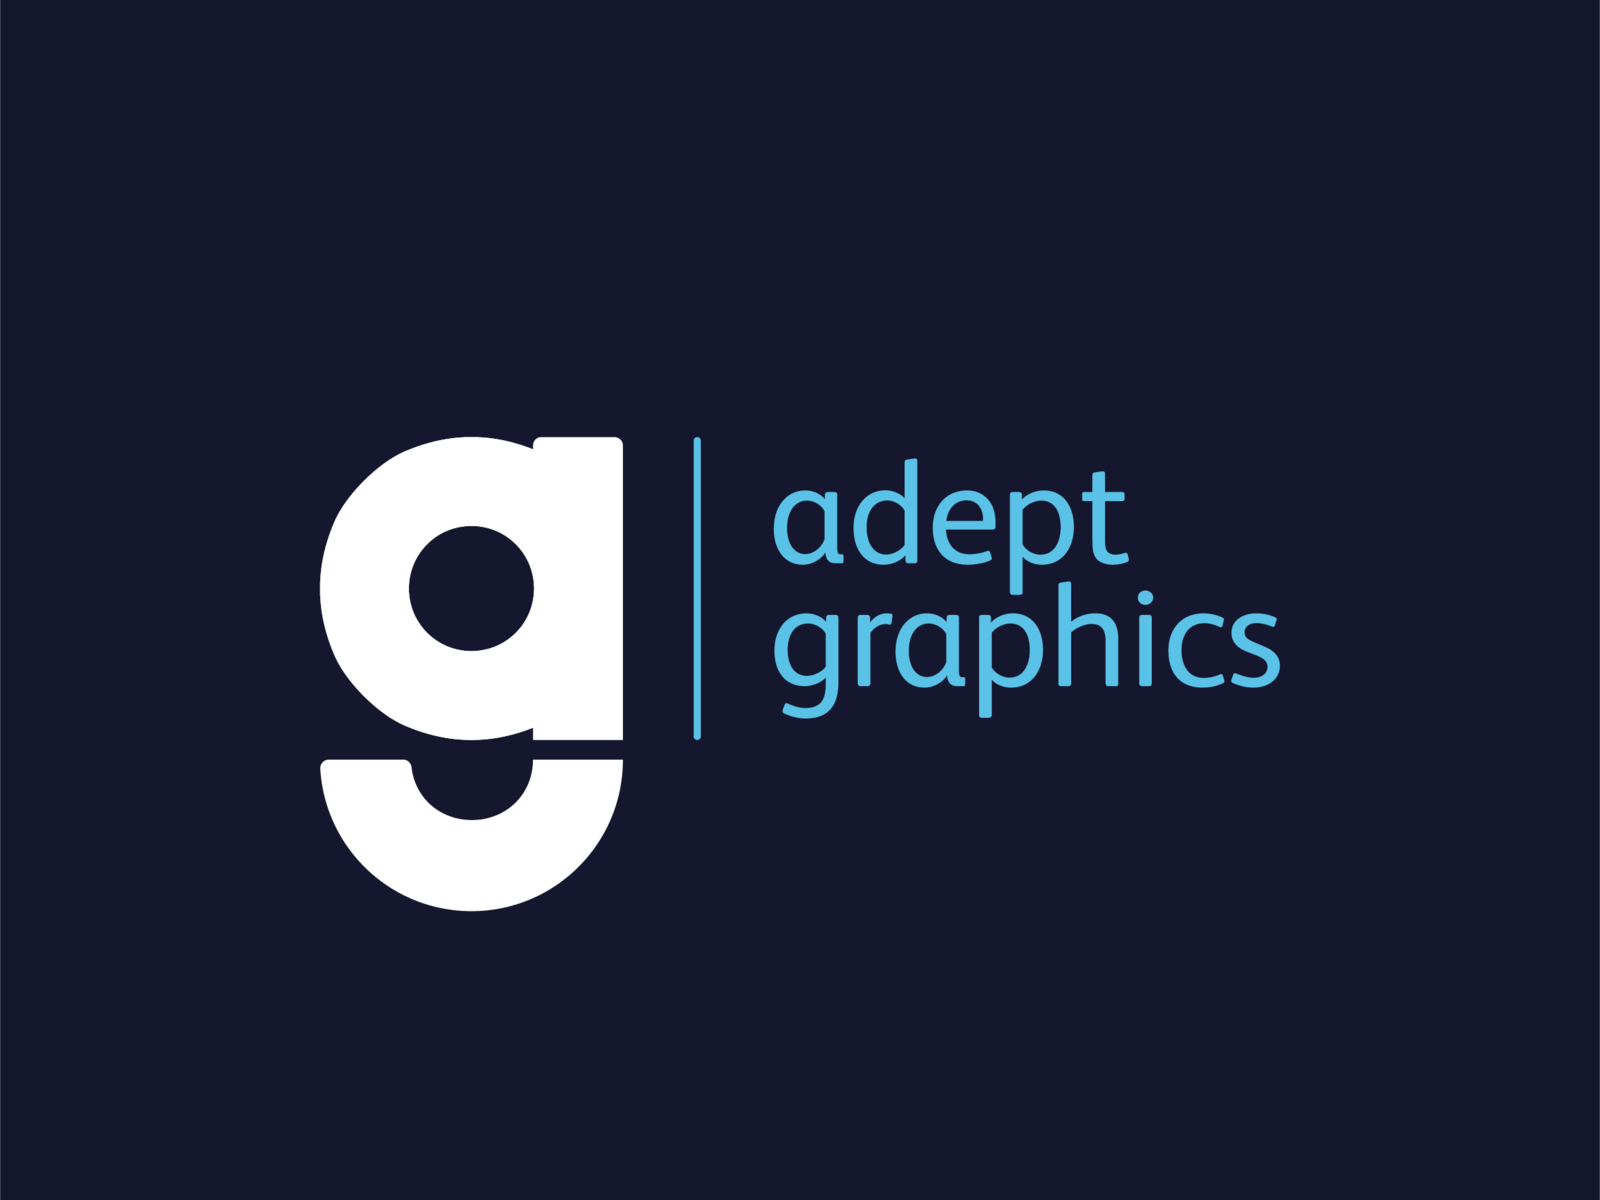 a & g monogram - Adept Graphics by Matthew Crowe on Dribbble